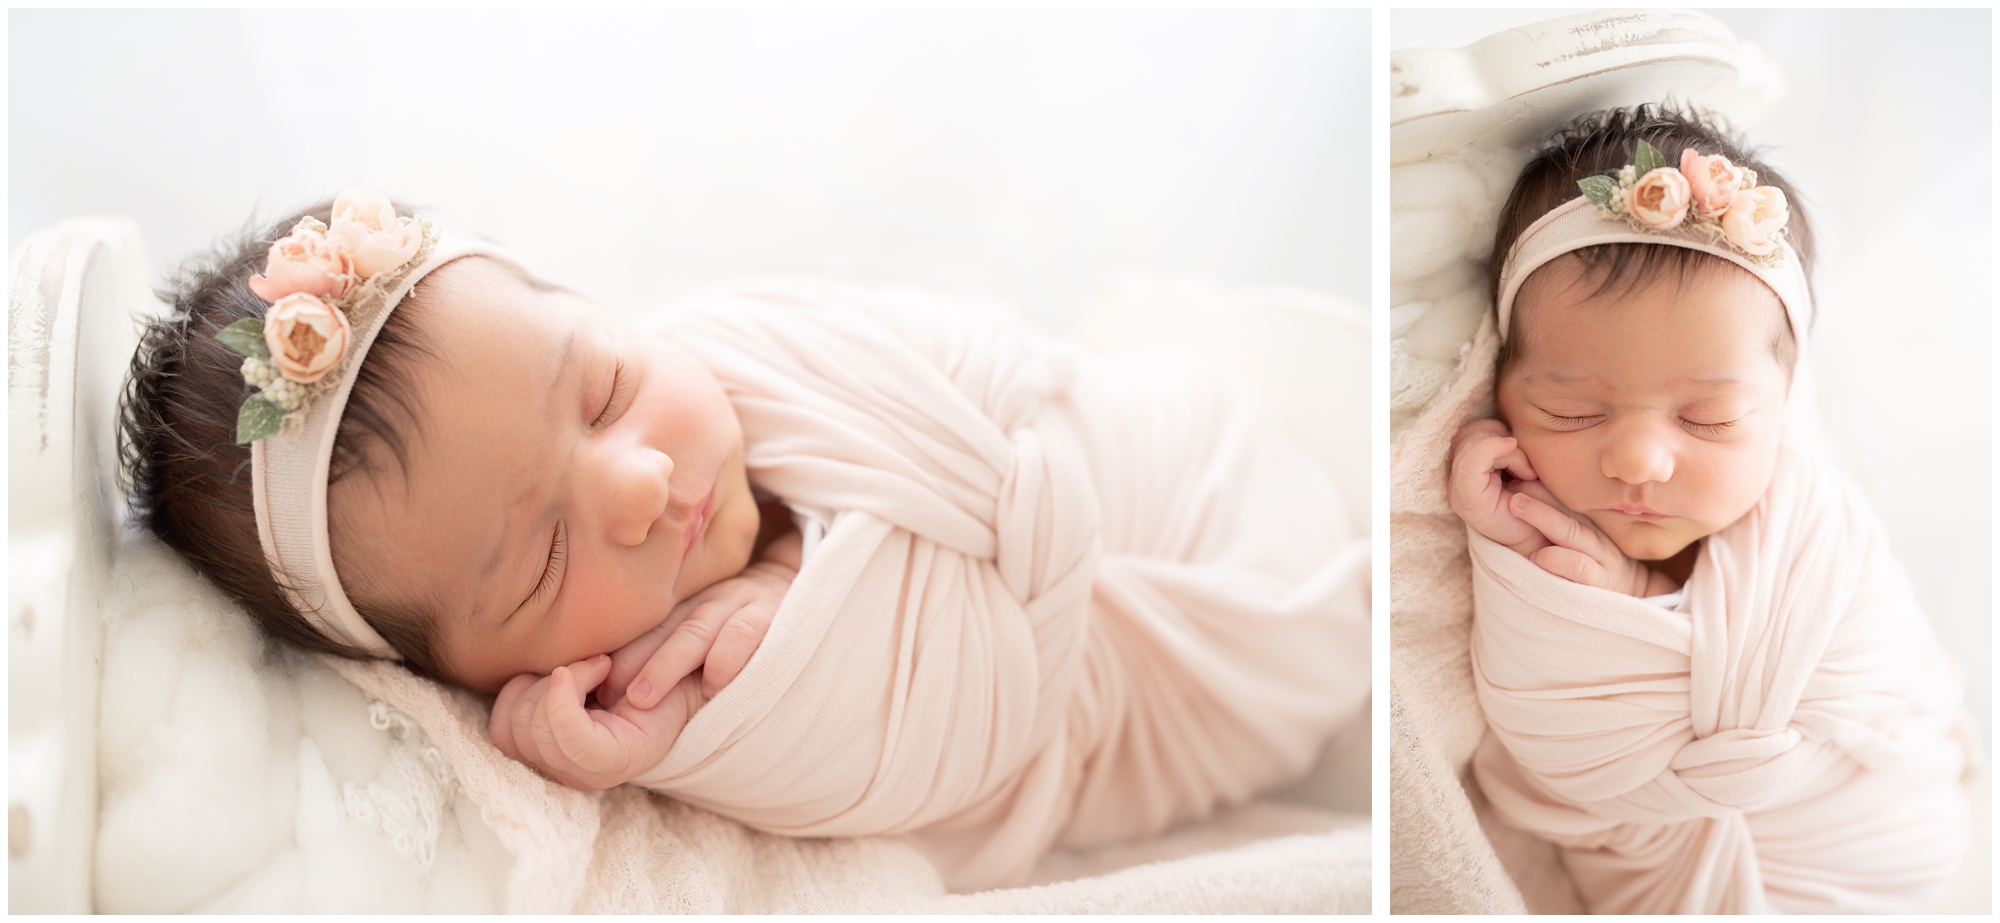 Brand new baby swaddled in pink laying on a pink fur being photographed in Jupiter Fl studio